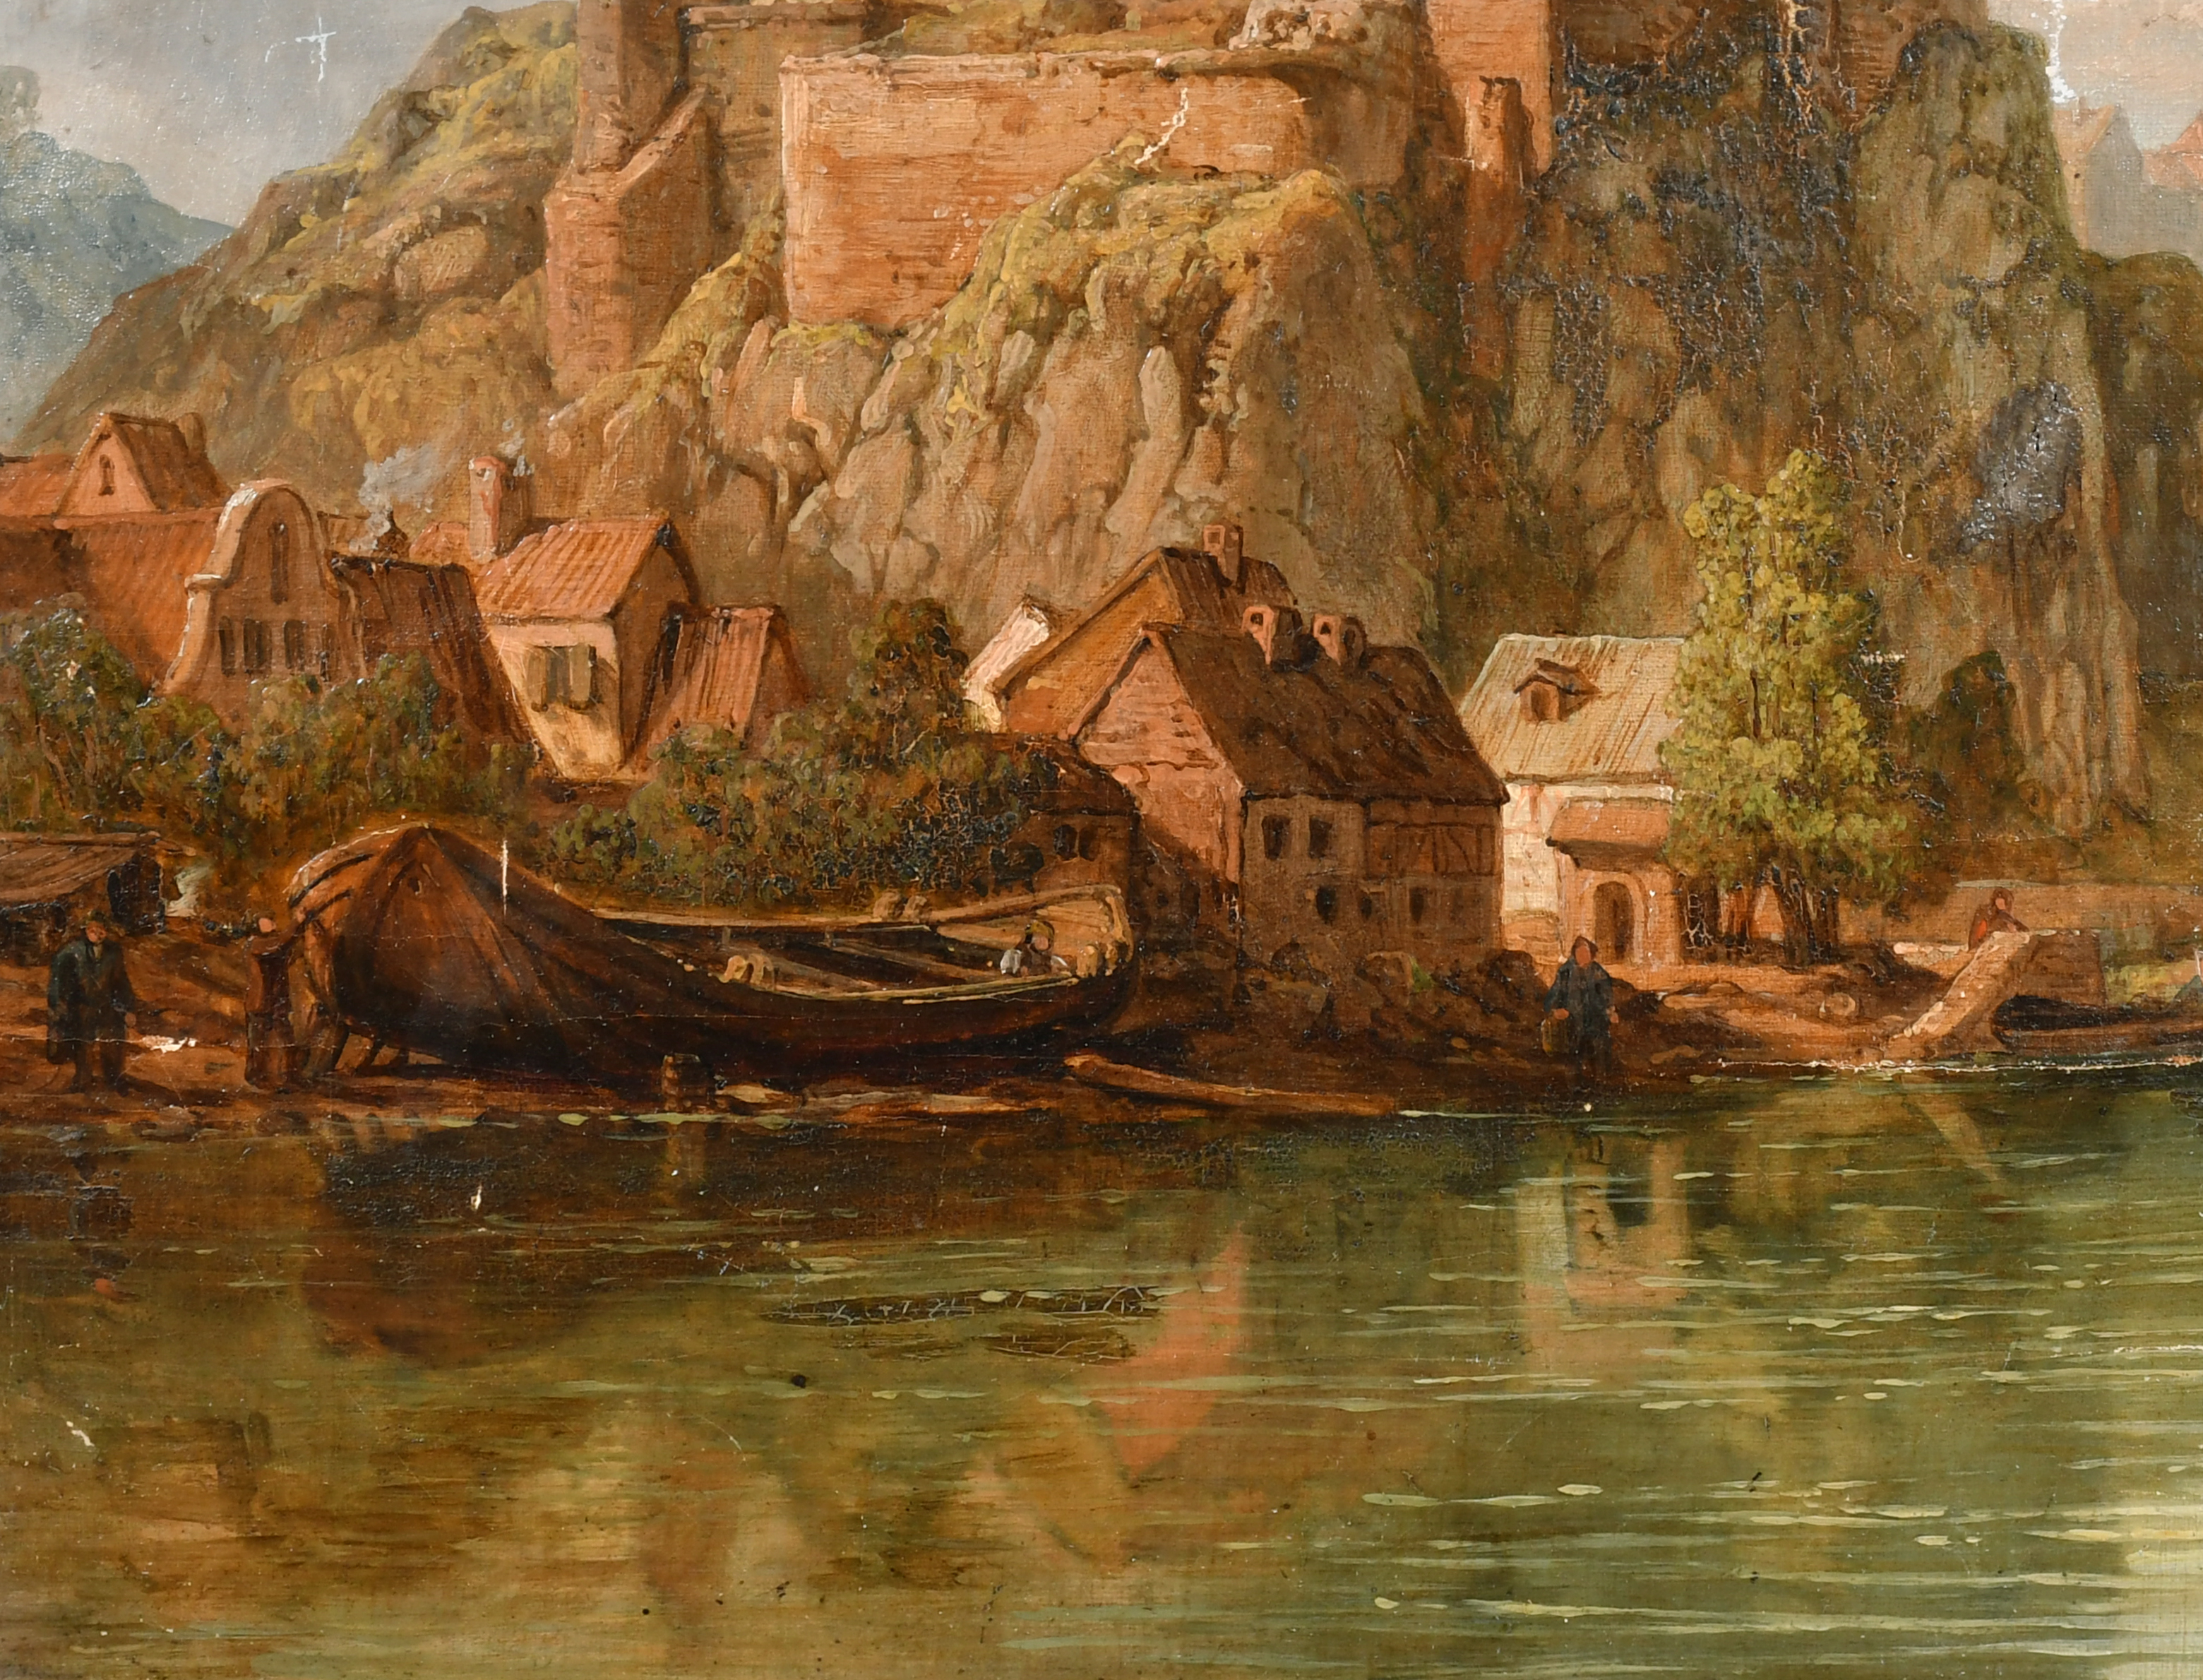 19th Century English School. Study of a Continental River Scene with Cottages, Oil on canvas laid